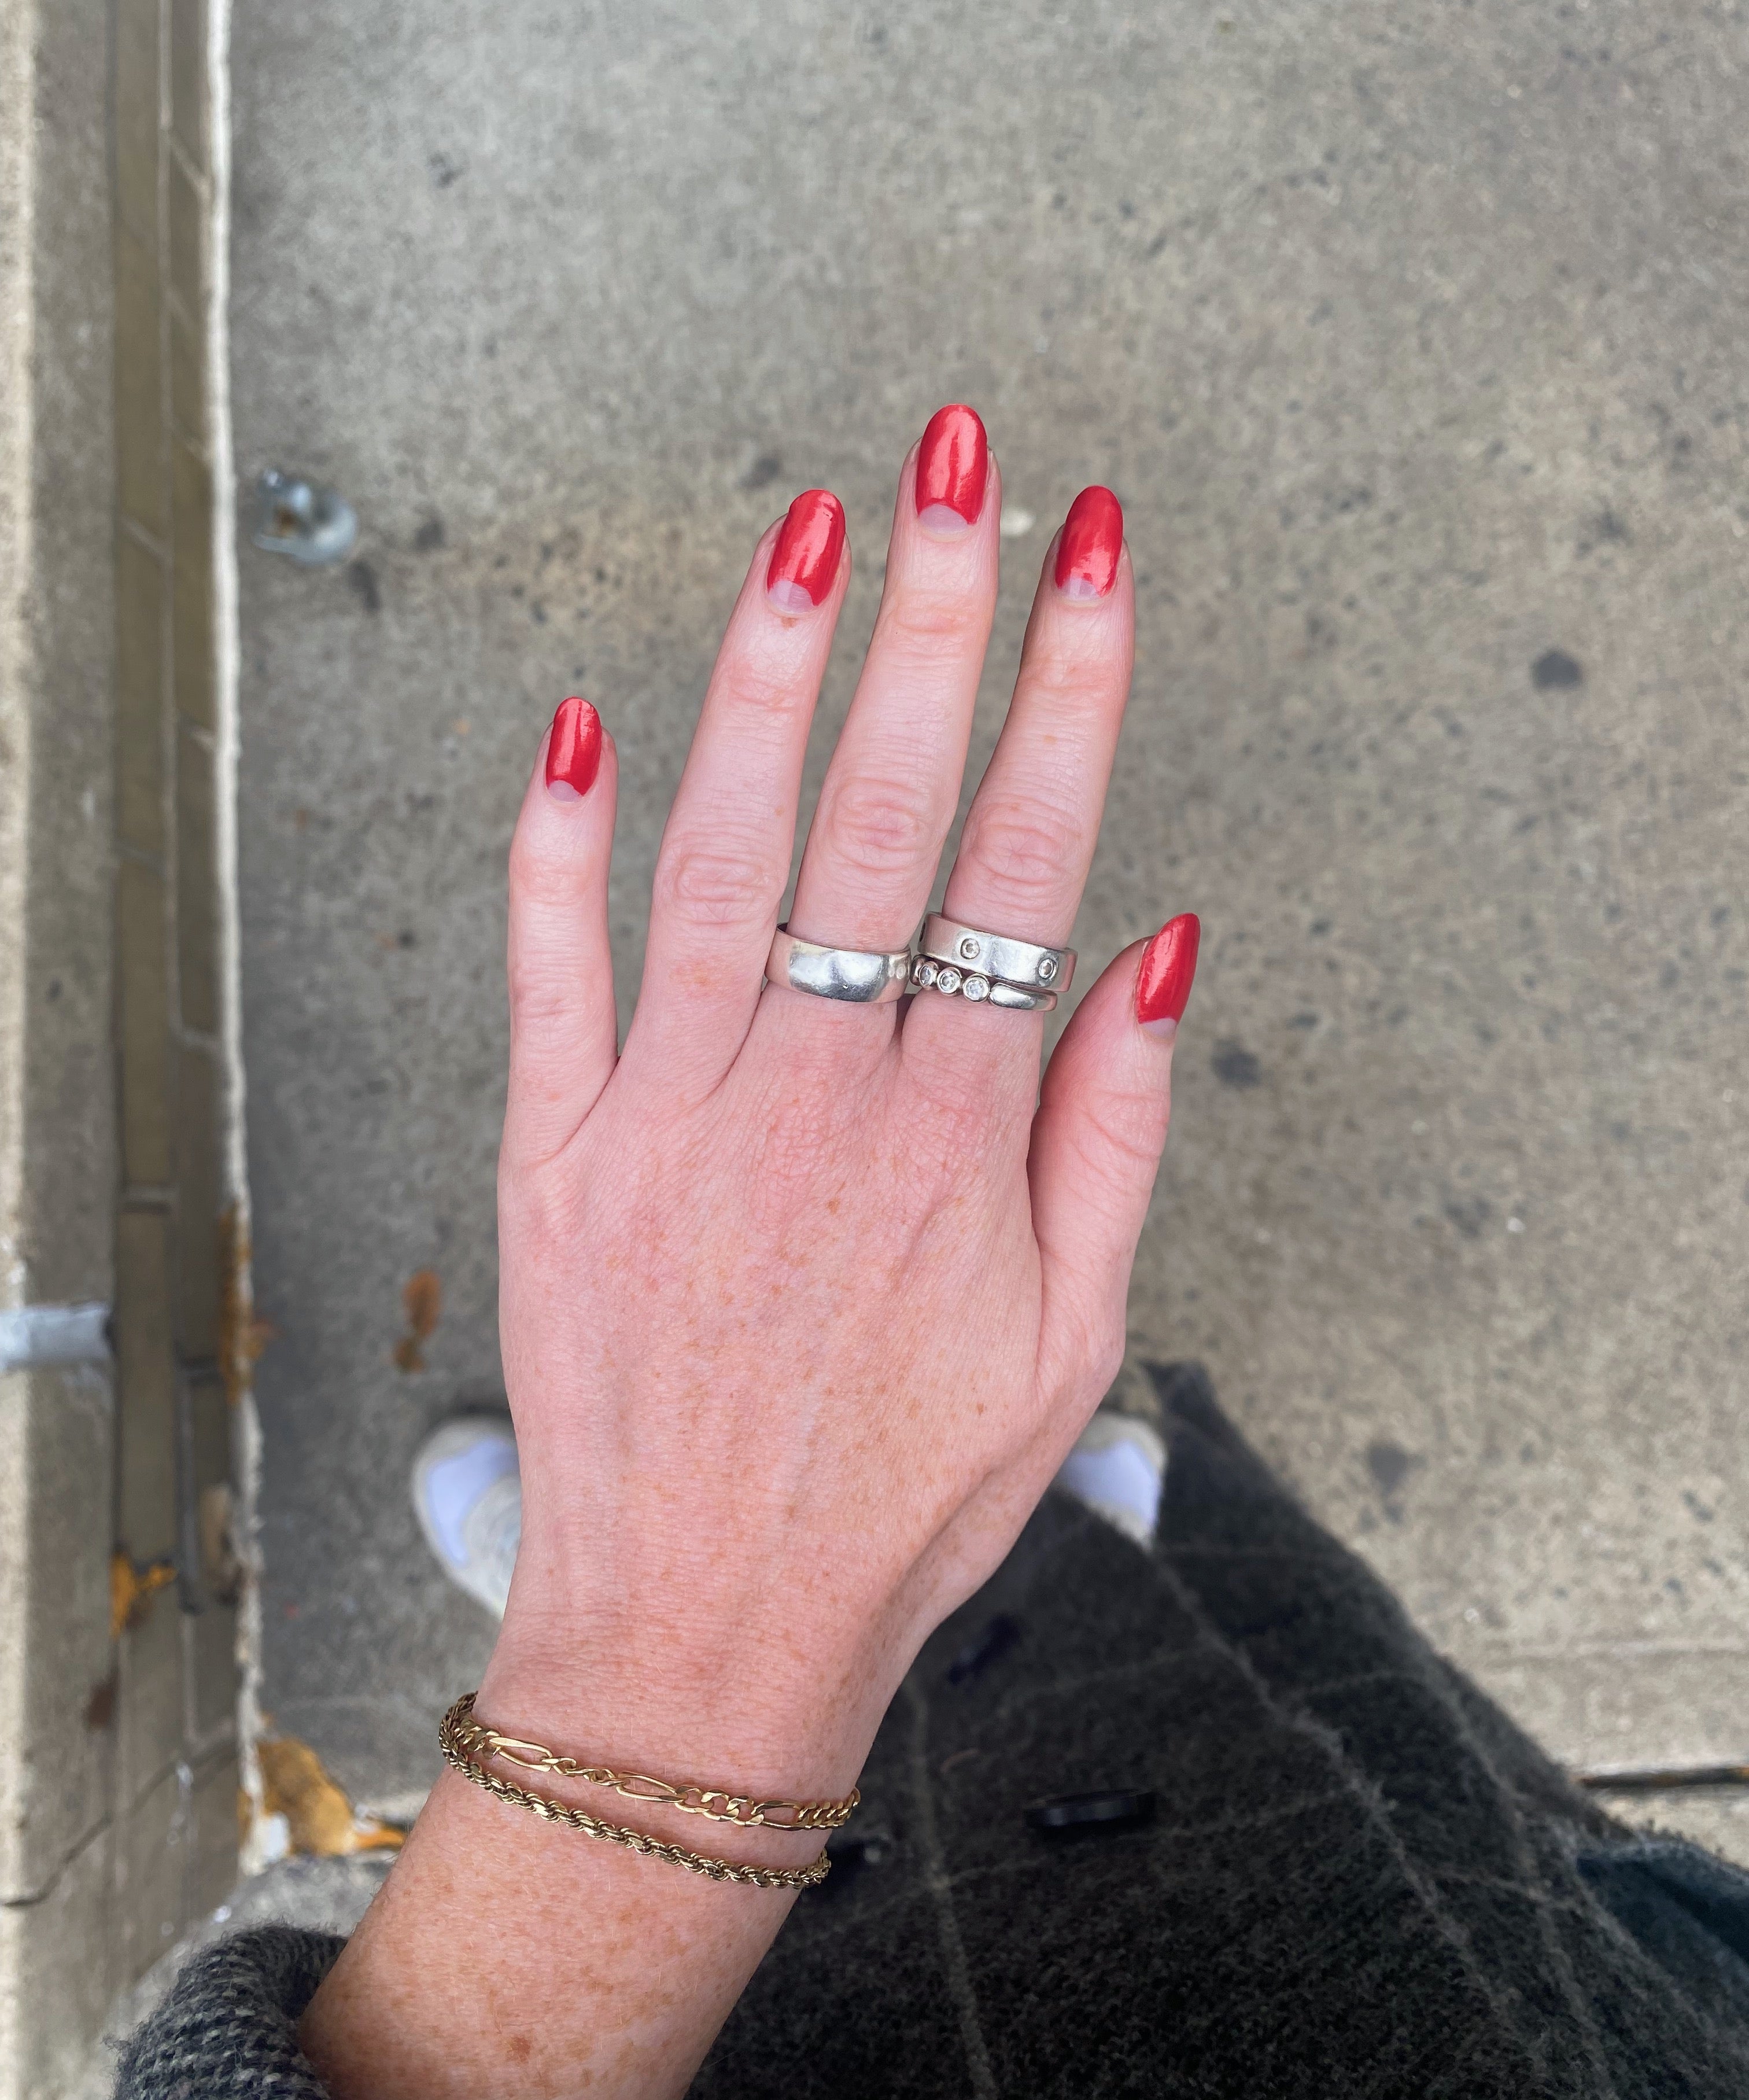 I Tried The Vintage 'Half Moon' Manicure & It's So Chic